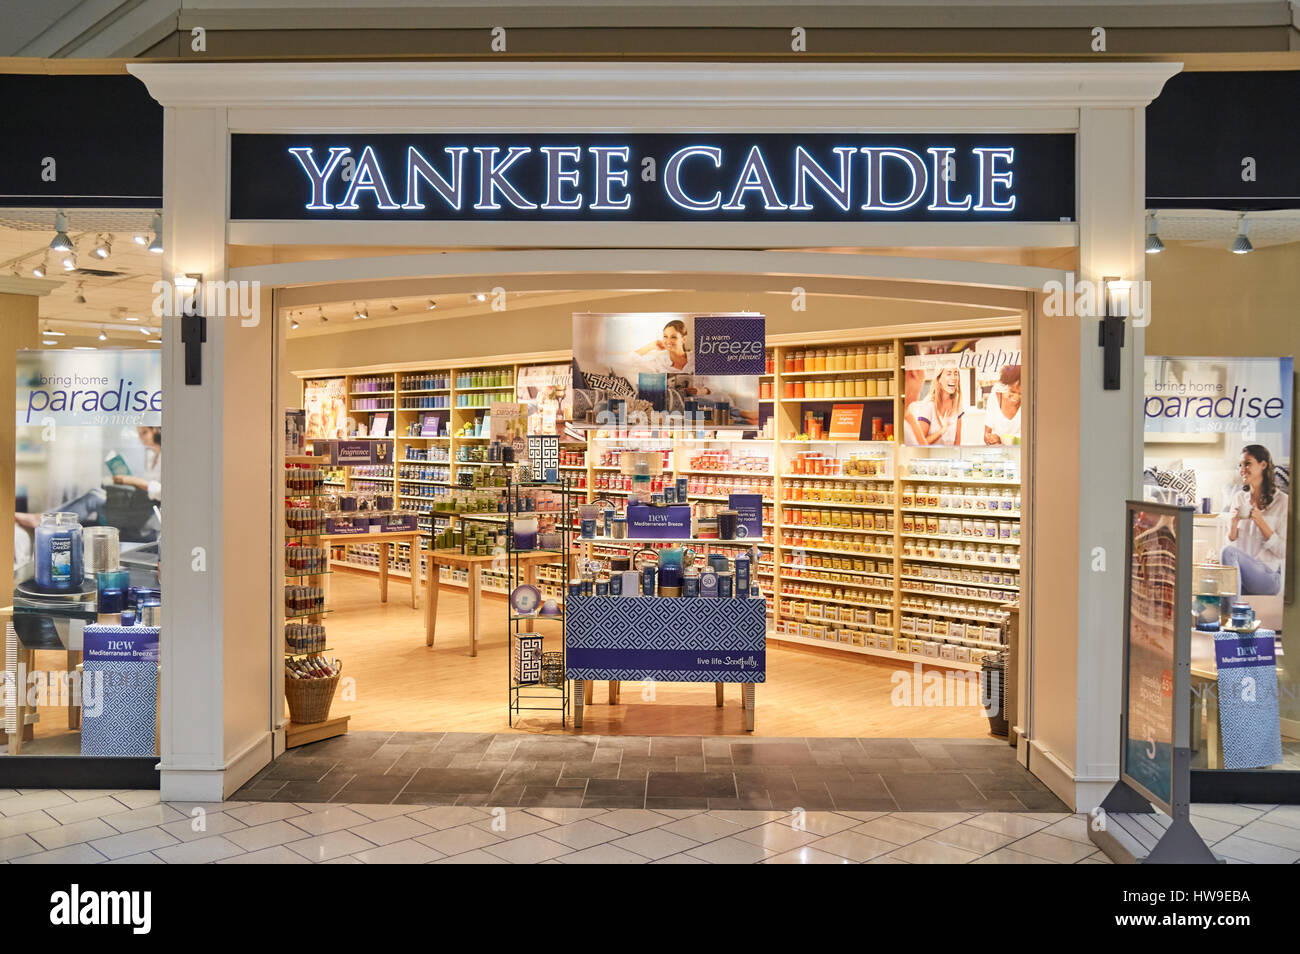 PLATTSBURGH, USA - MARCH 5, 2017 : Yankee Candle bootique. The Yankee Candle Company is an American manufacturer and retailer of scented candles. Stock Photo